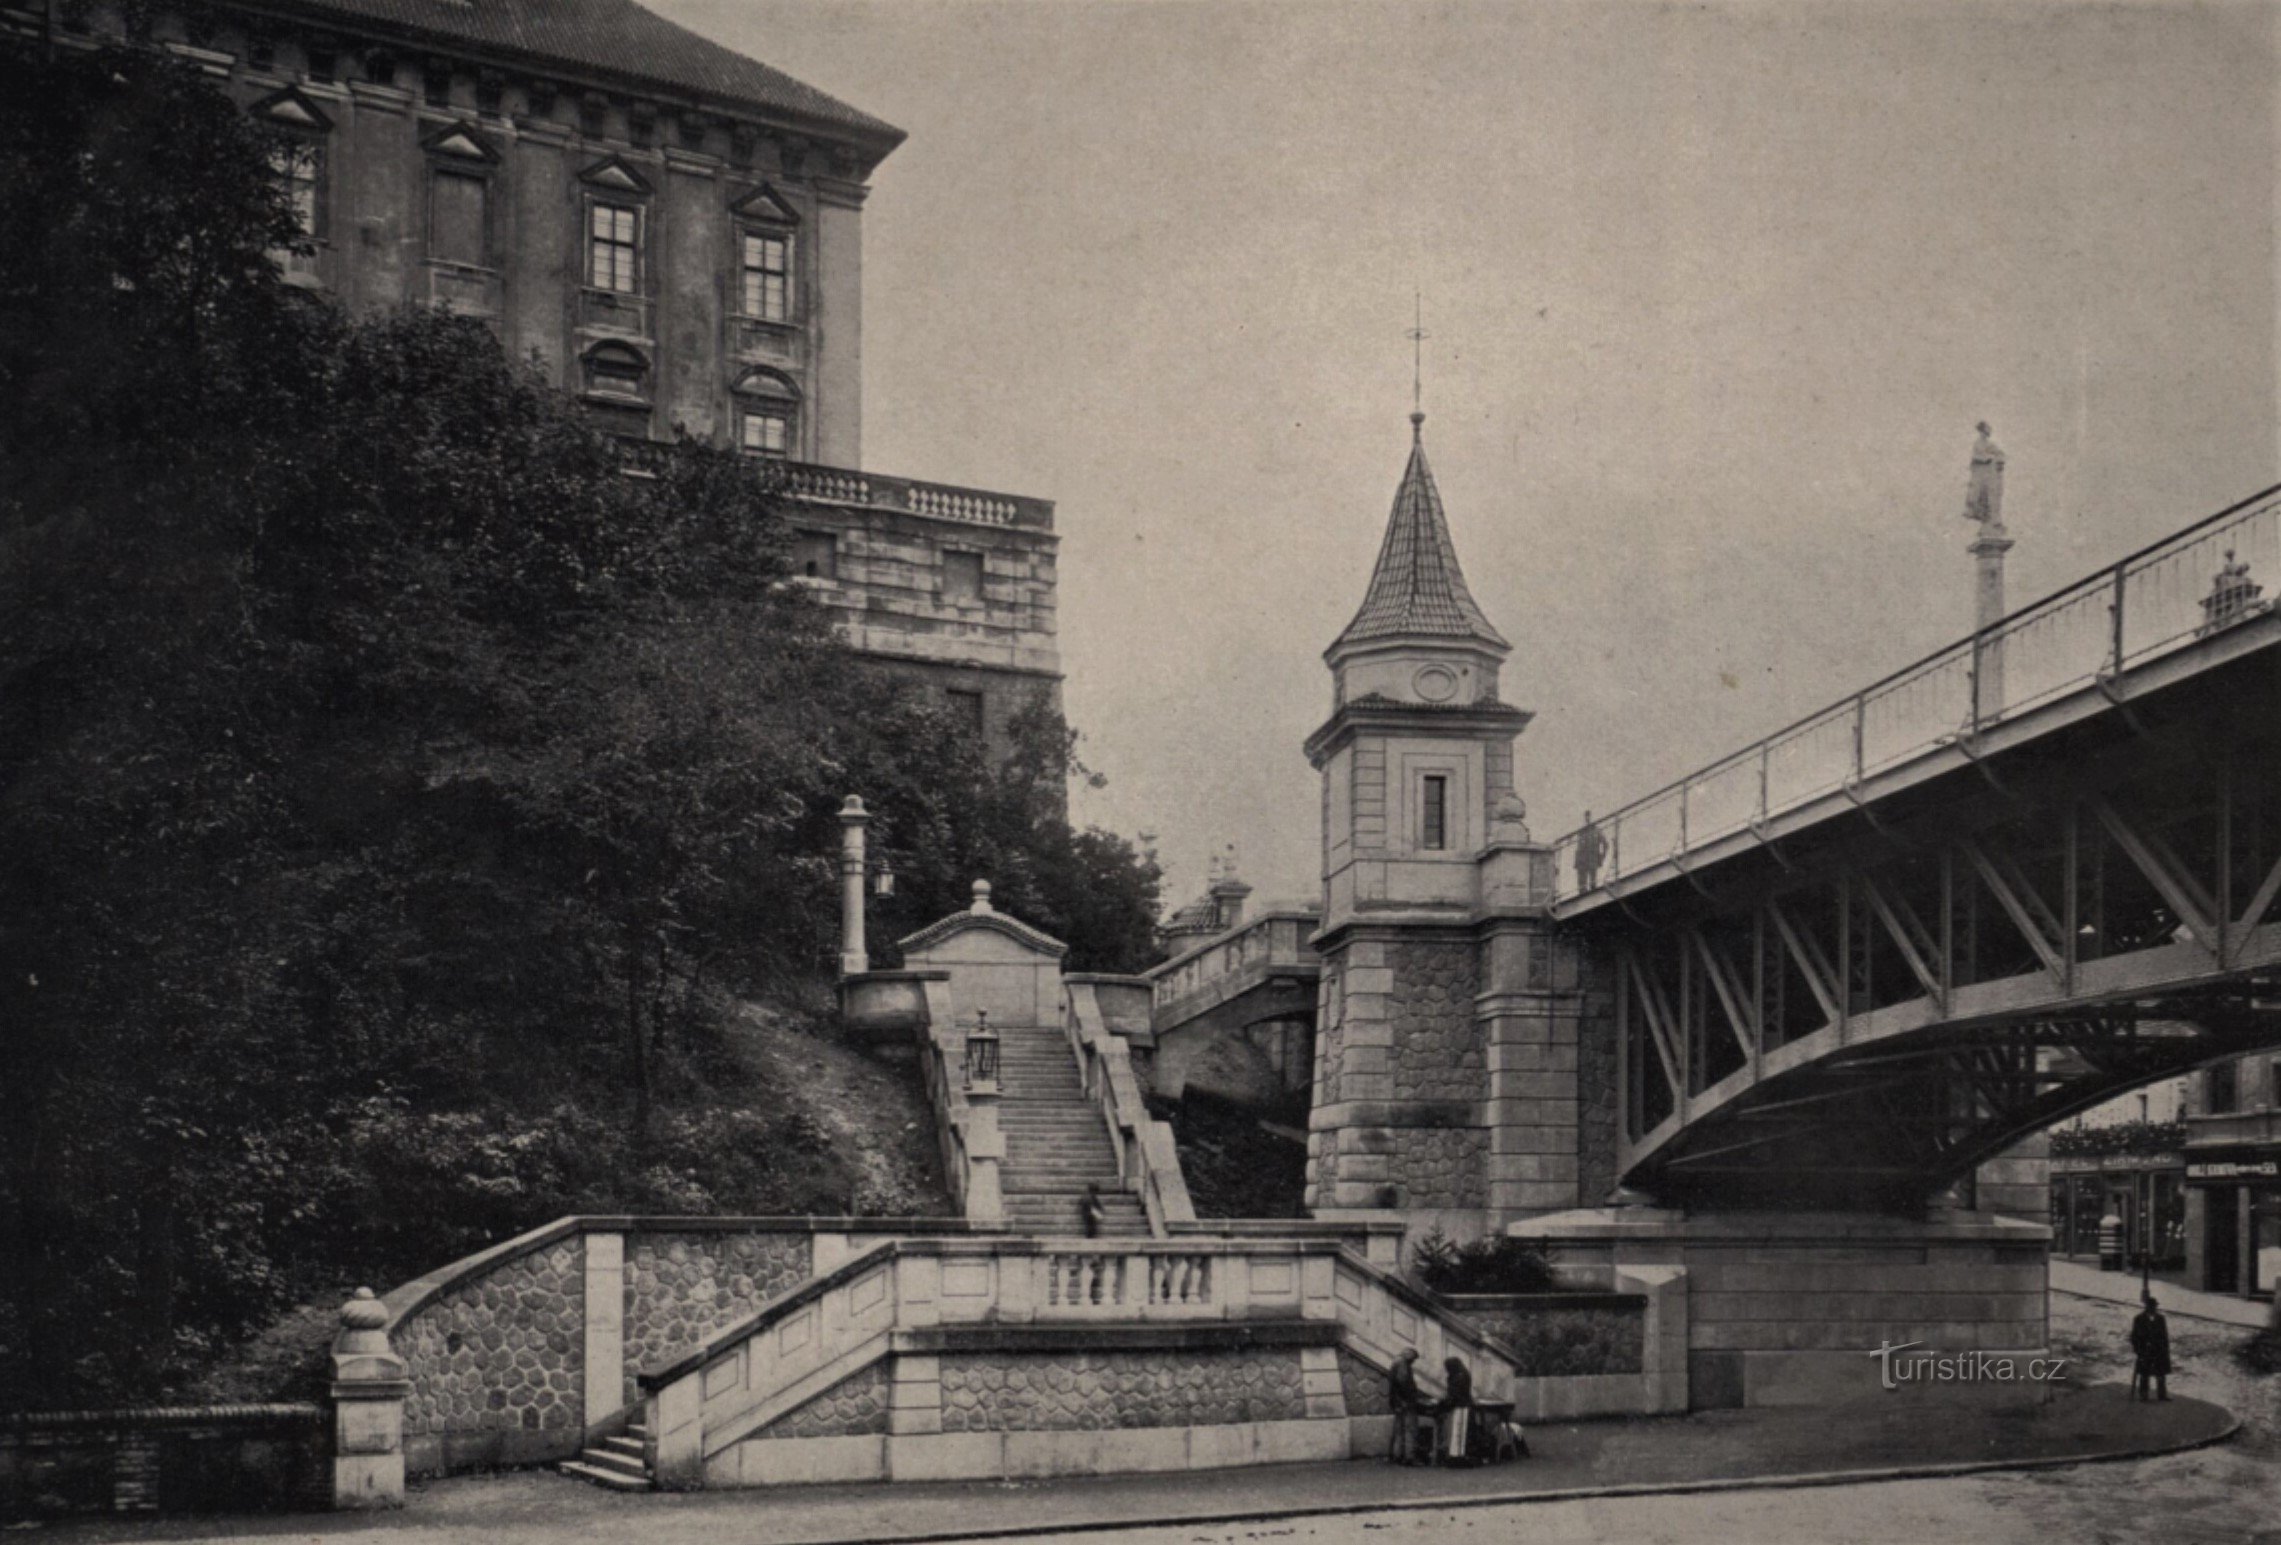 The bridge over the Elbe in Roudnice nad Labem in 1910